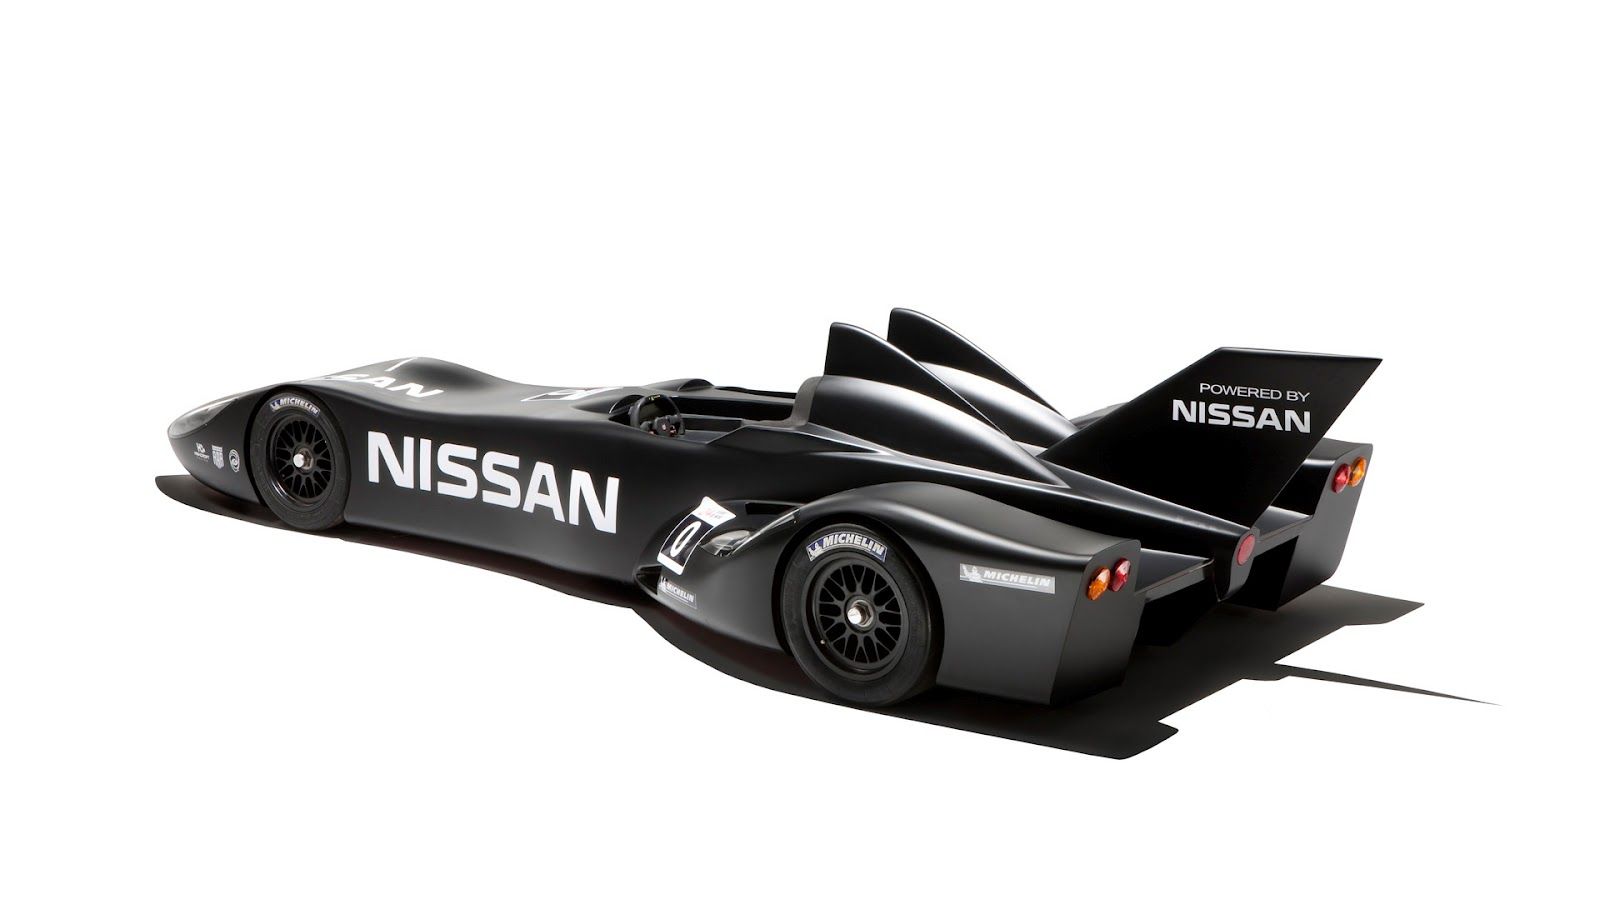 2012 Nissan Delta Wing Rear Angle (View 7 of 12)